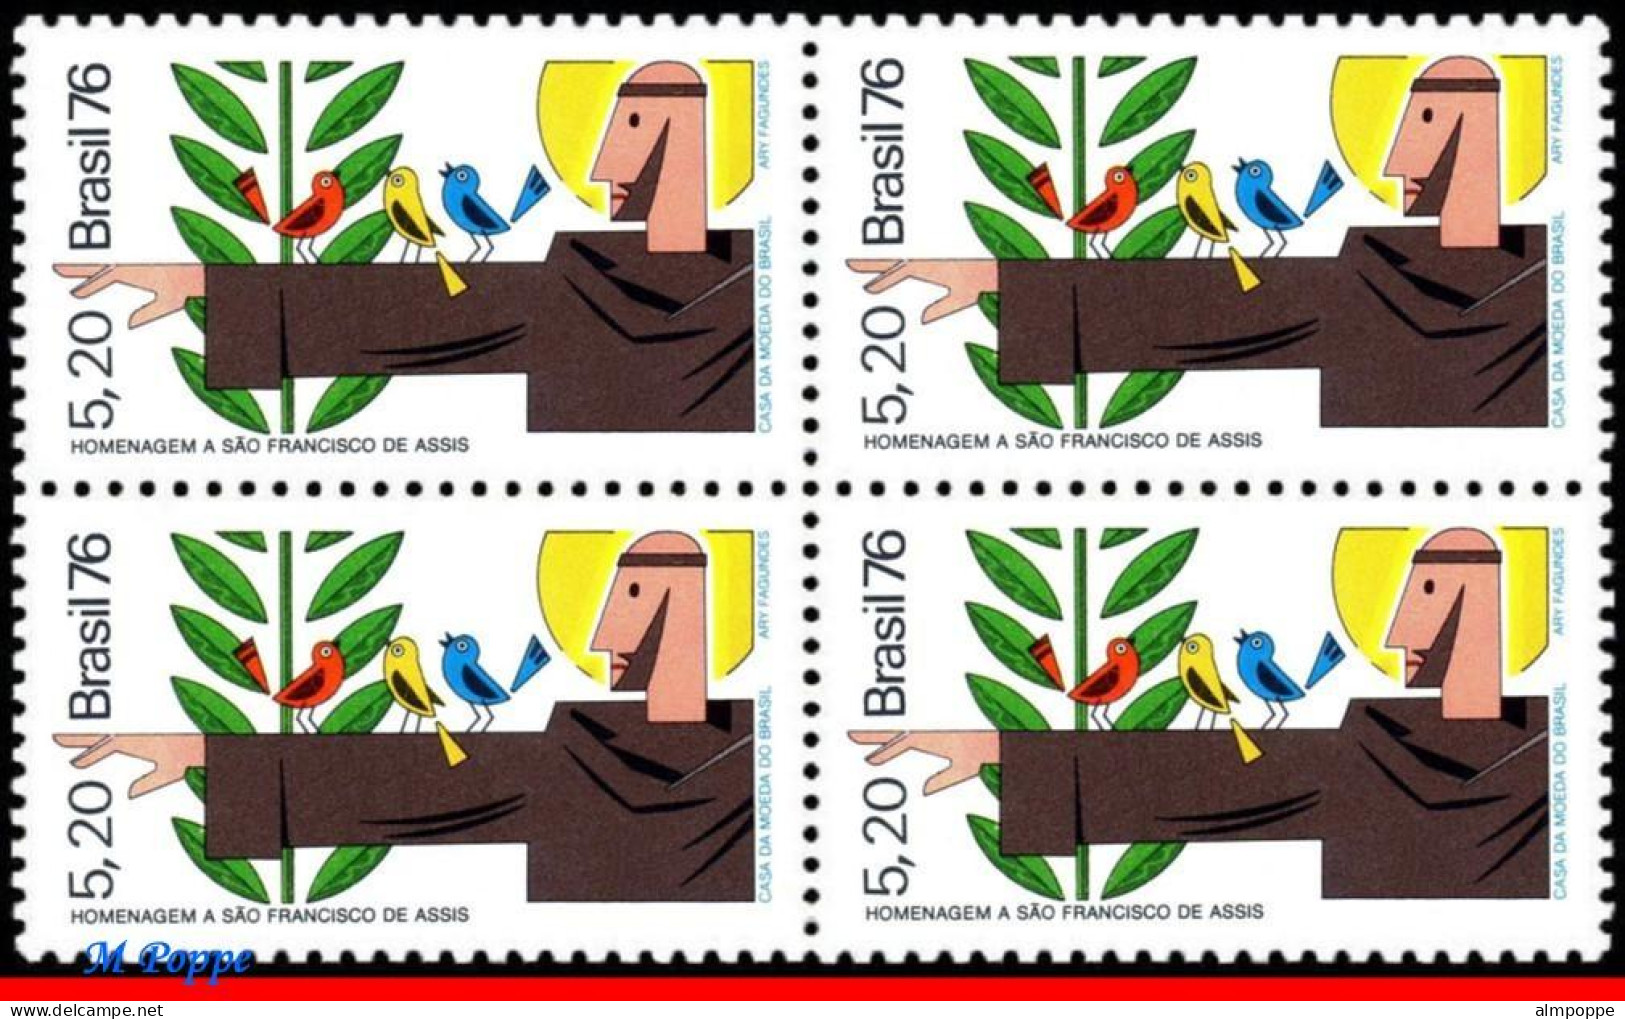 Ref. BR-1477-Q BRAZIL 1976 - ST. FRANCIS OF ASSISI,RELIGION, BIRDS, MI# 1562, BLOCK MNH, FAMOUS PEOPLE 4V Sc# 1477 - Hojas Bloque